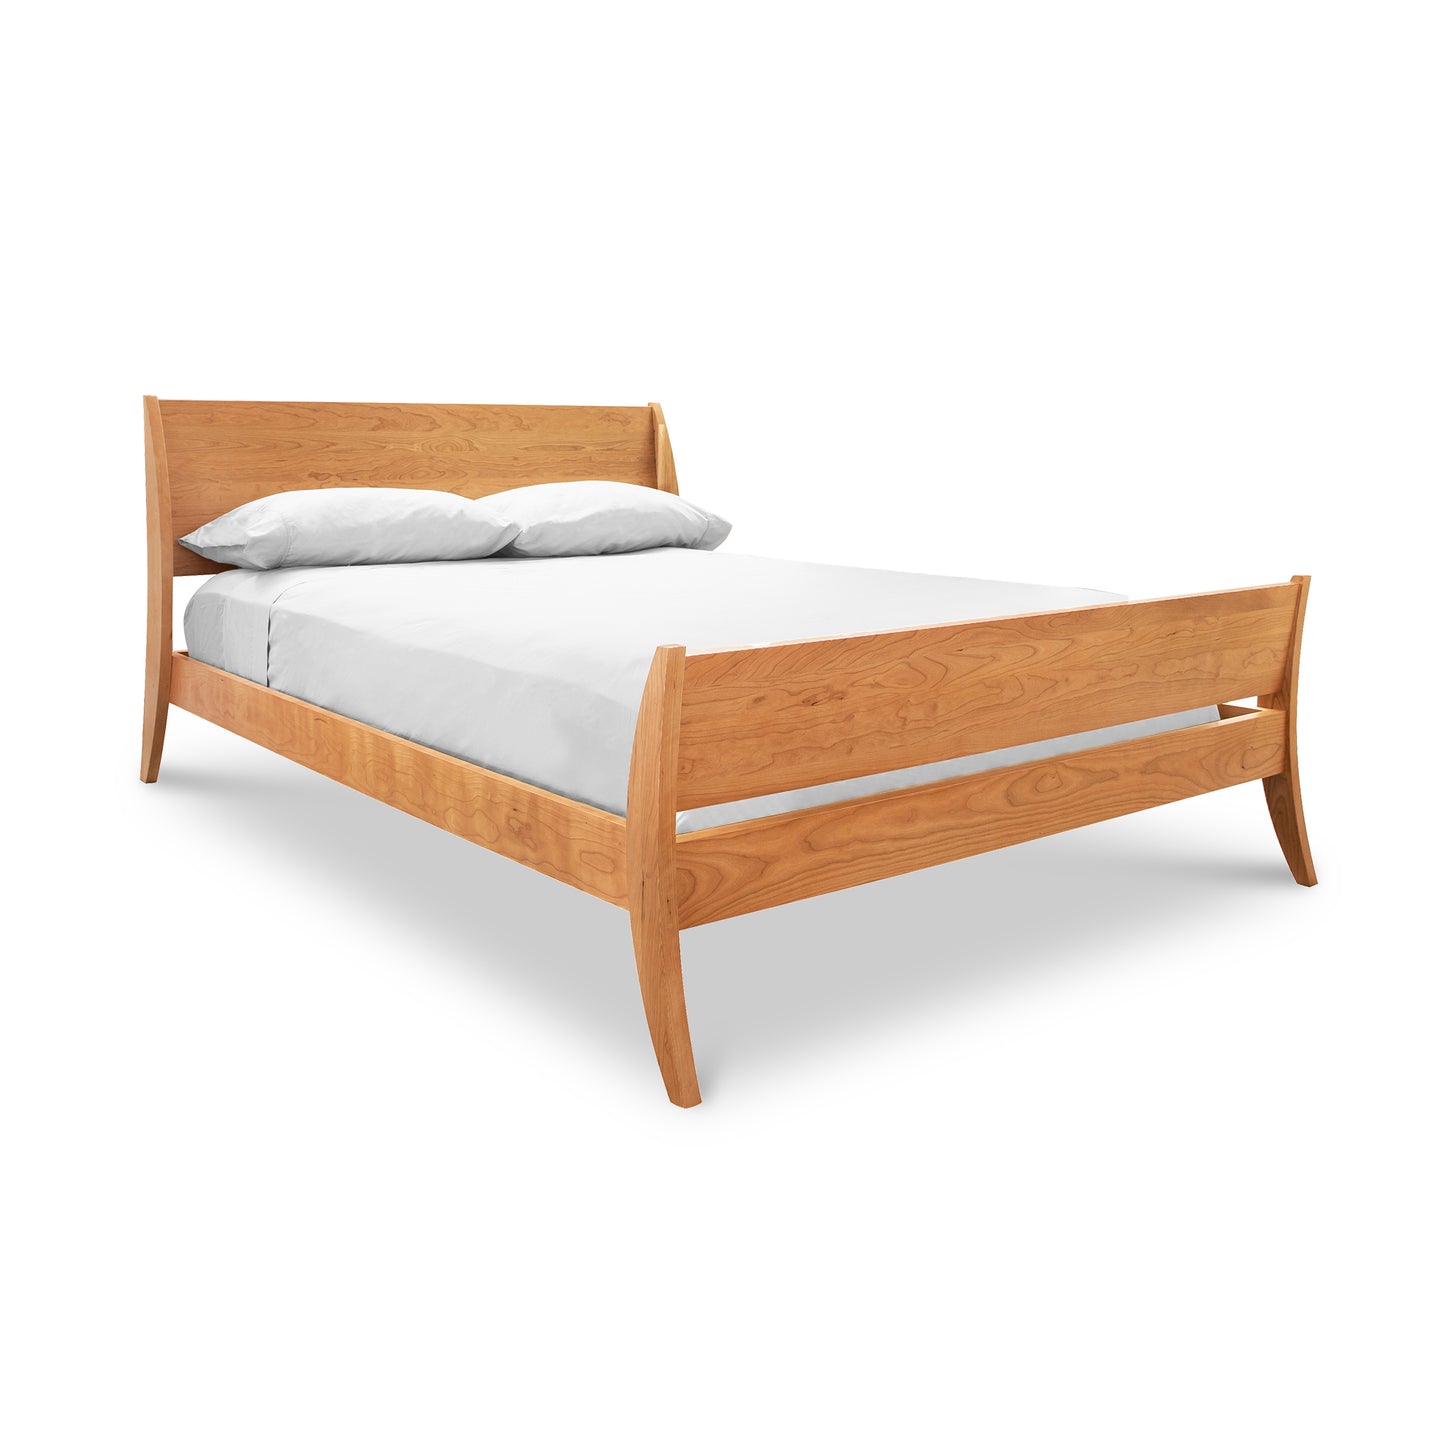 The Lyndon Furniture Holland Sleigh Bed adds a contemporary twist to any elegant bedroom centerpiece, with its wooden frame beautifully complemented by a white sheet.